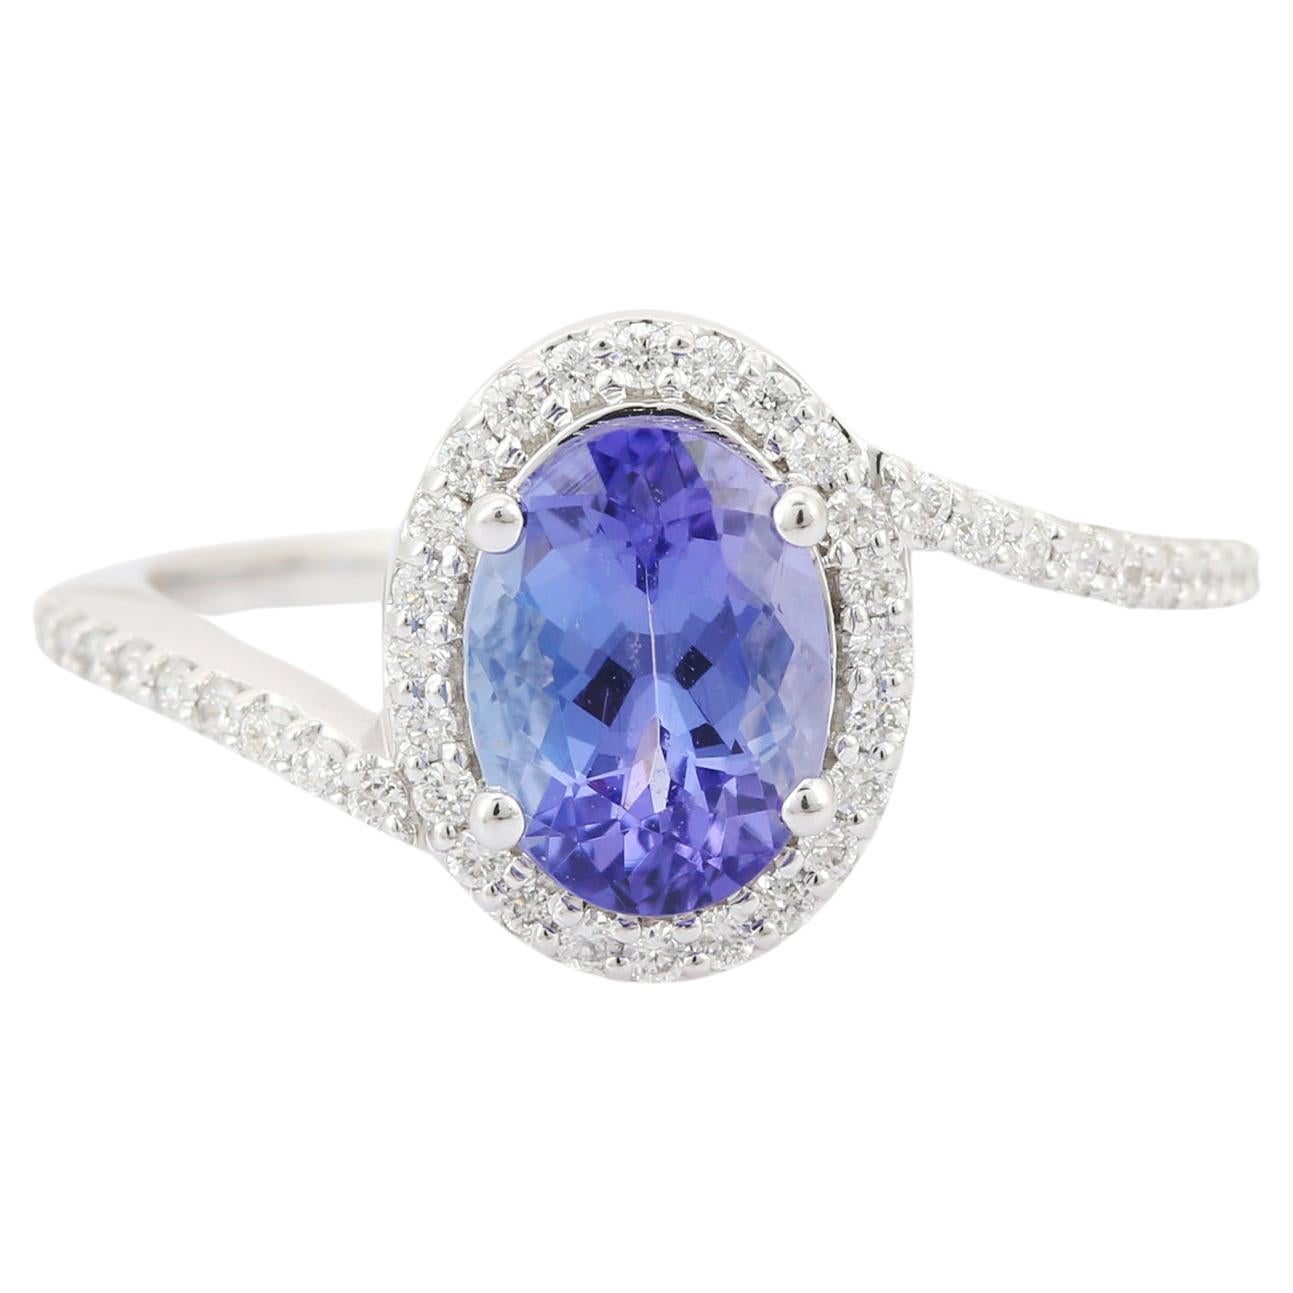 For Sale:  Diamond Ring with Tanzanite in 18K White Gold